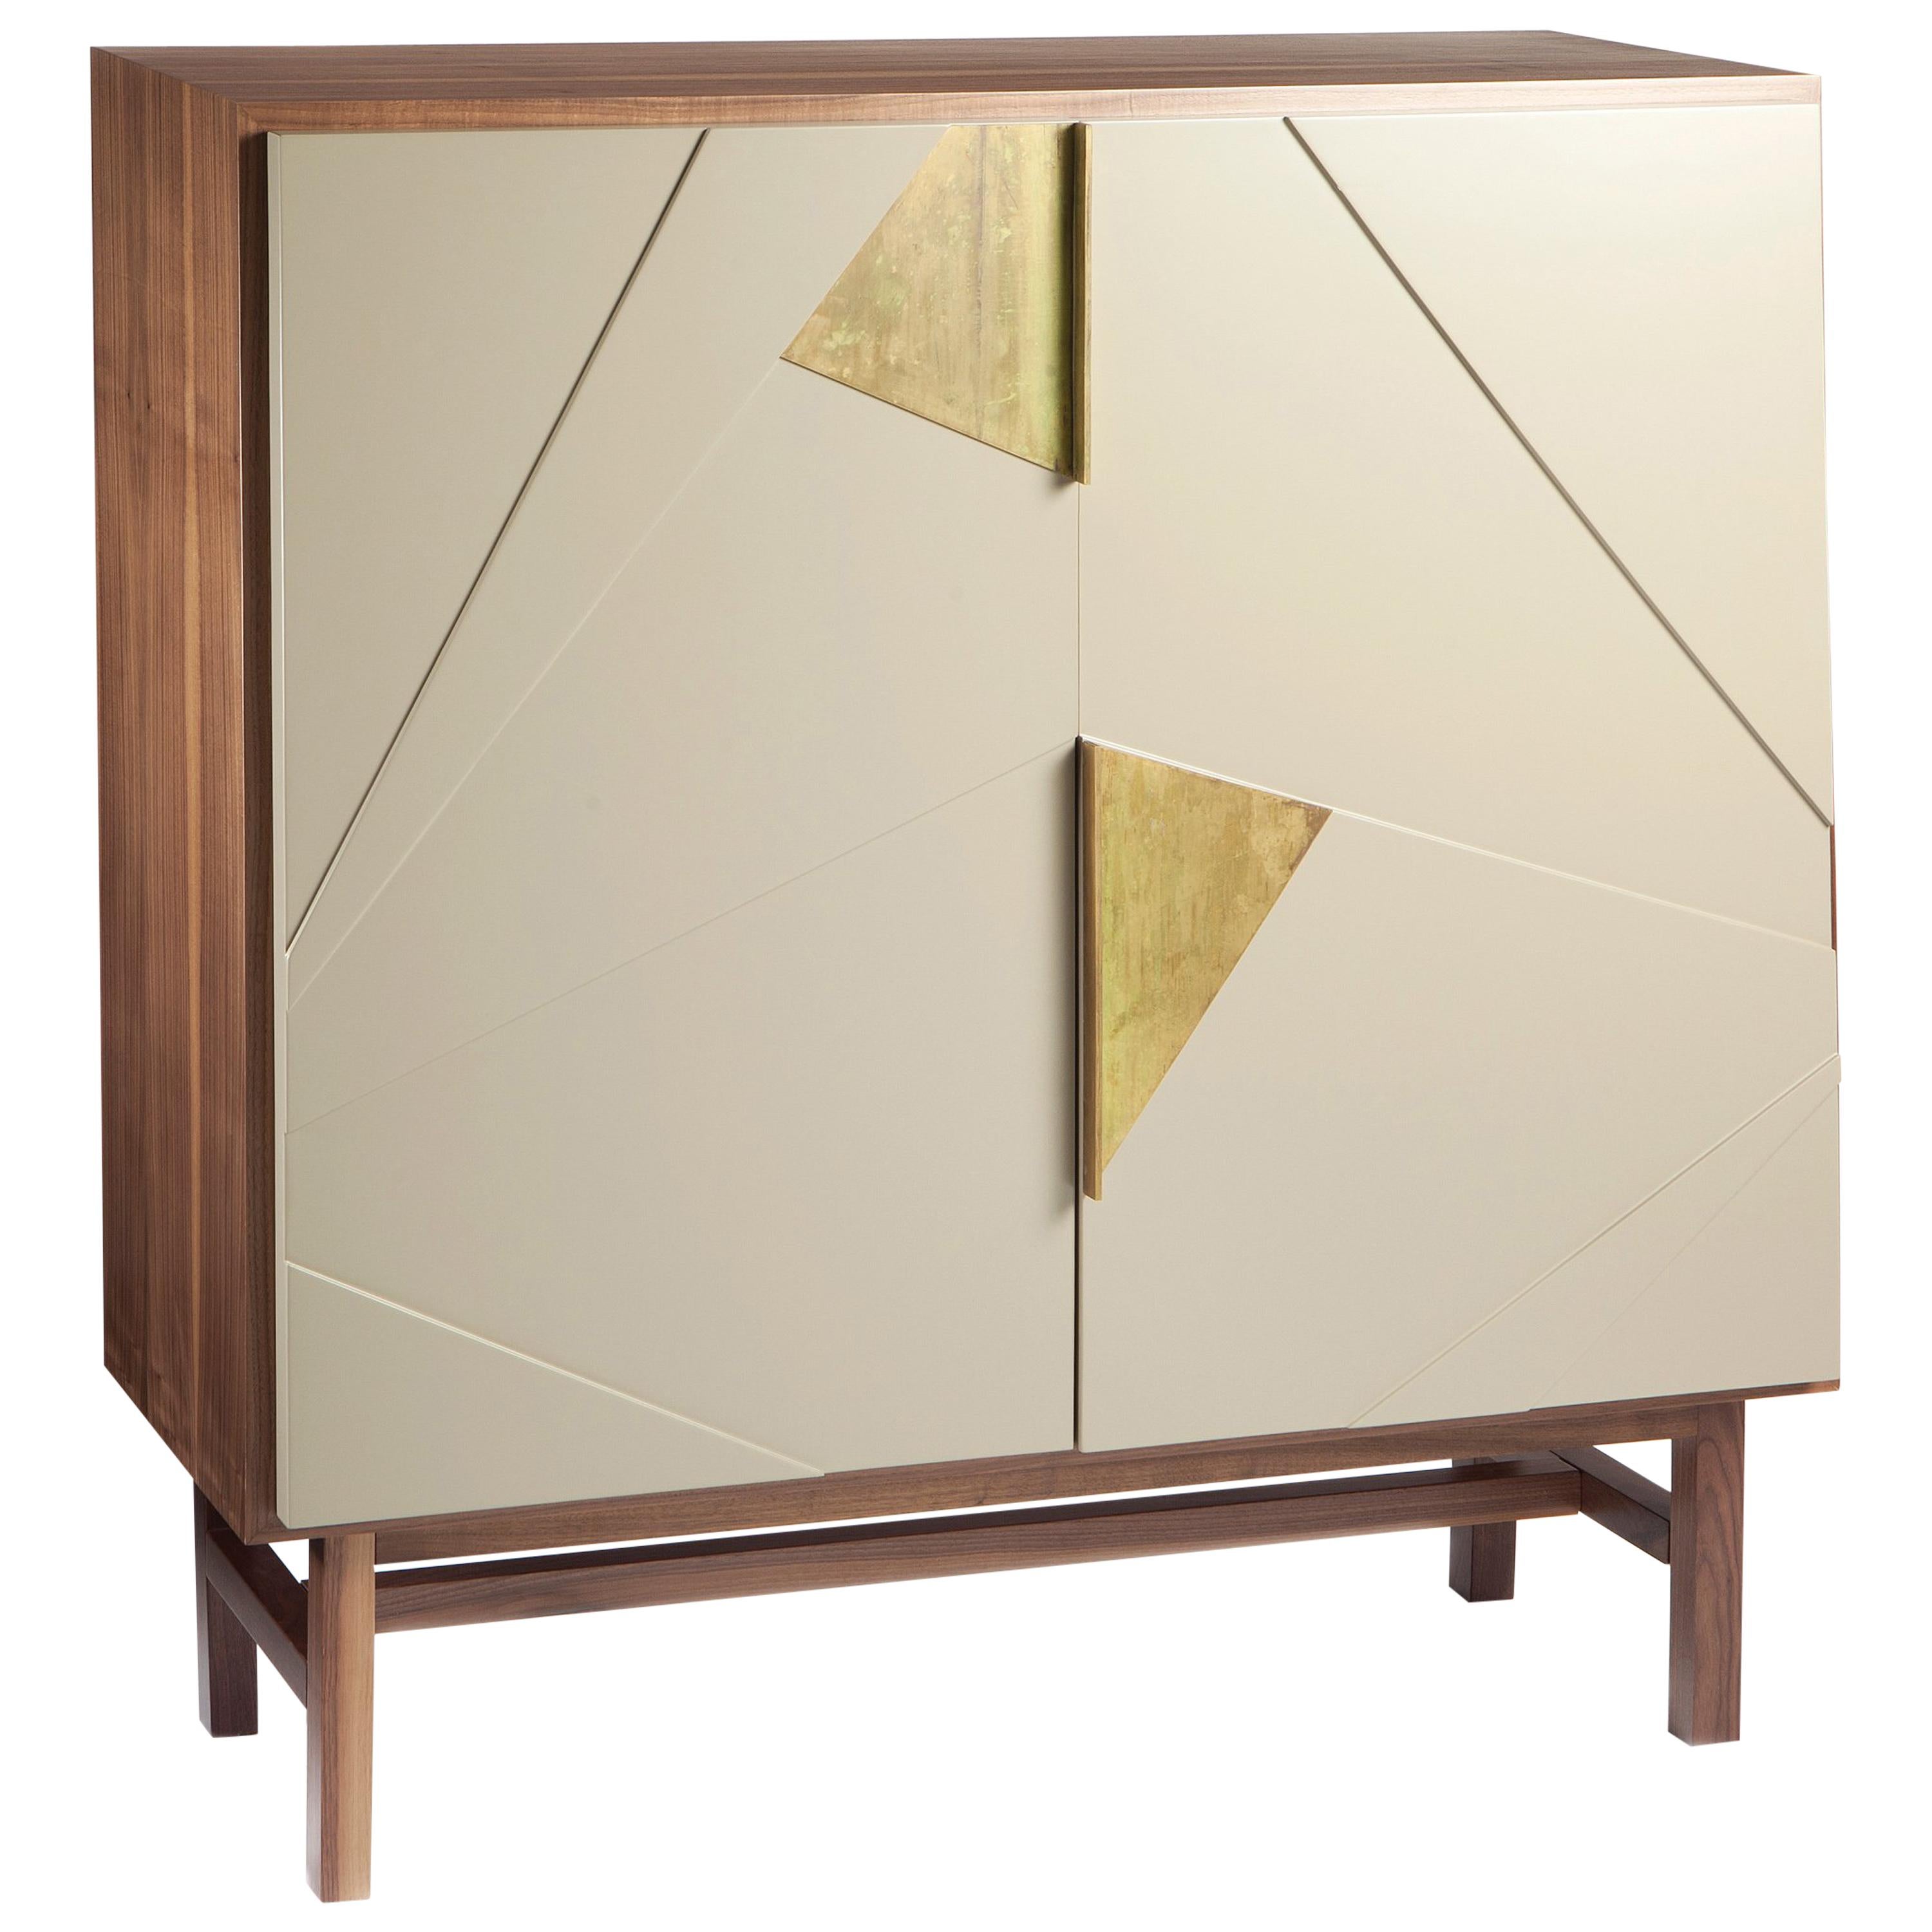 Art Deco Inspired Walnut Wood, Ivory Lacquer, Brass Handles Bar Cabinet Jazz For Sale